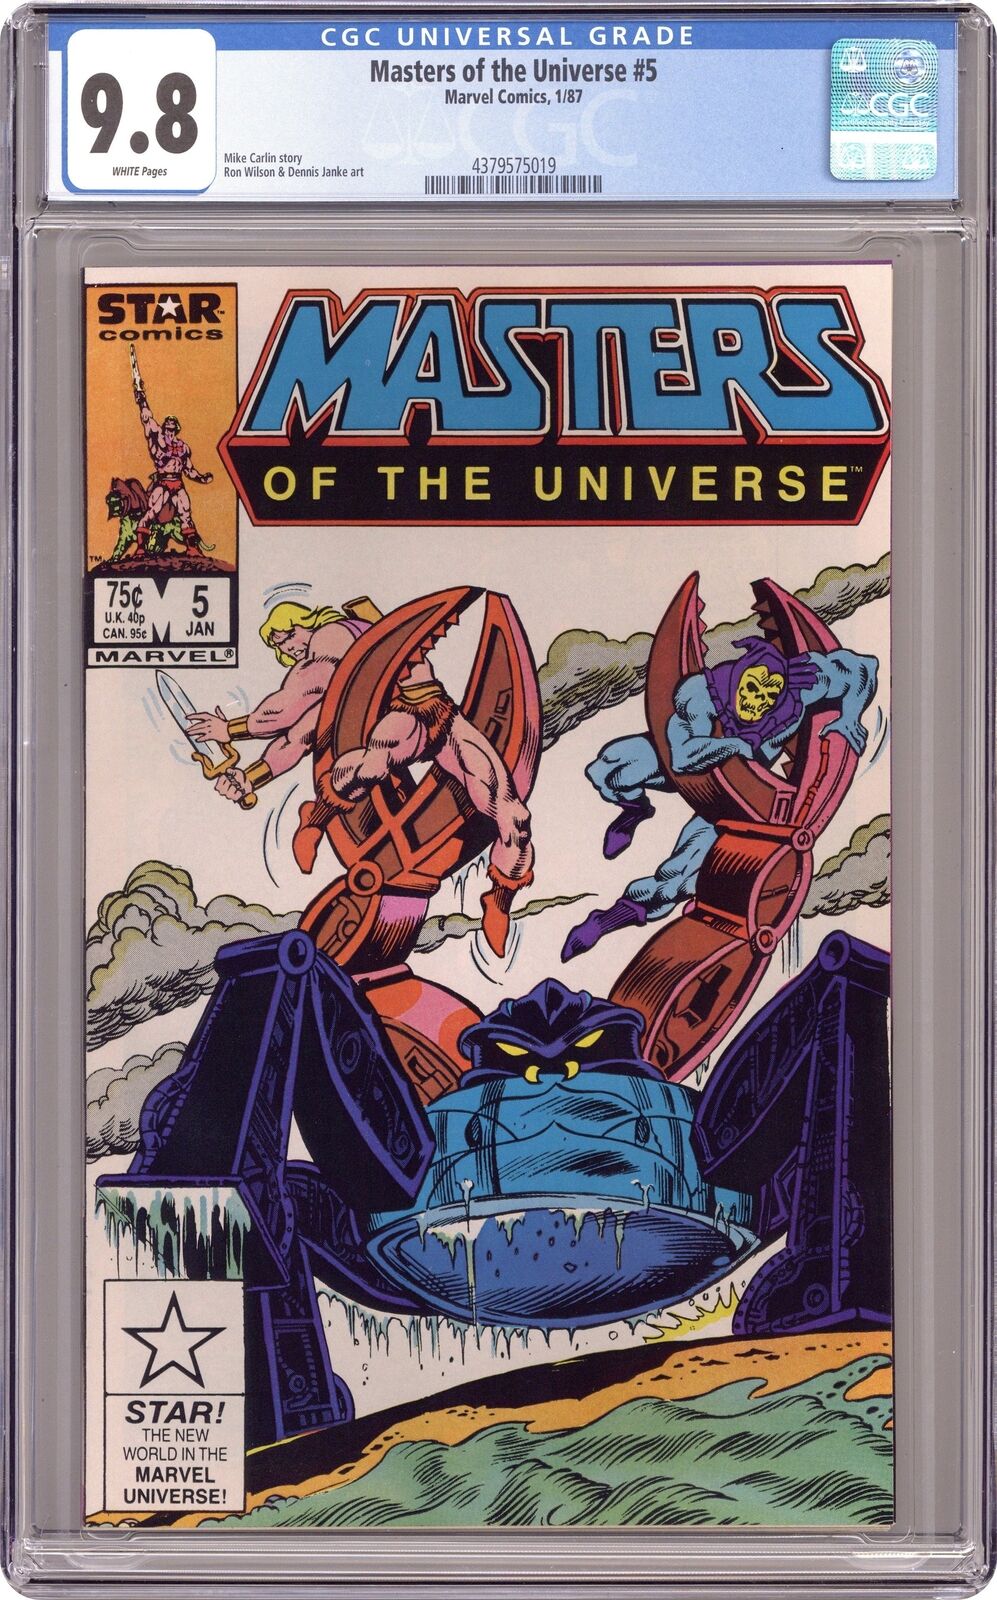 Masters of the Universe #5 CGC 9.8 1987 4379575019